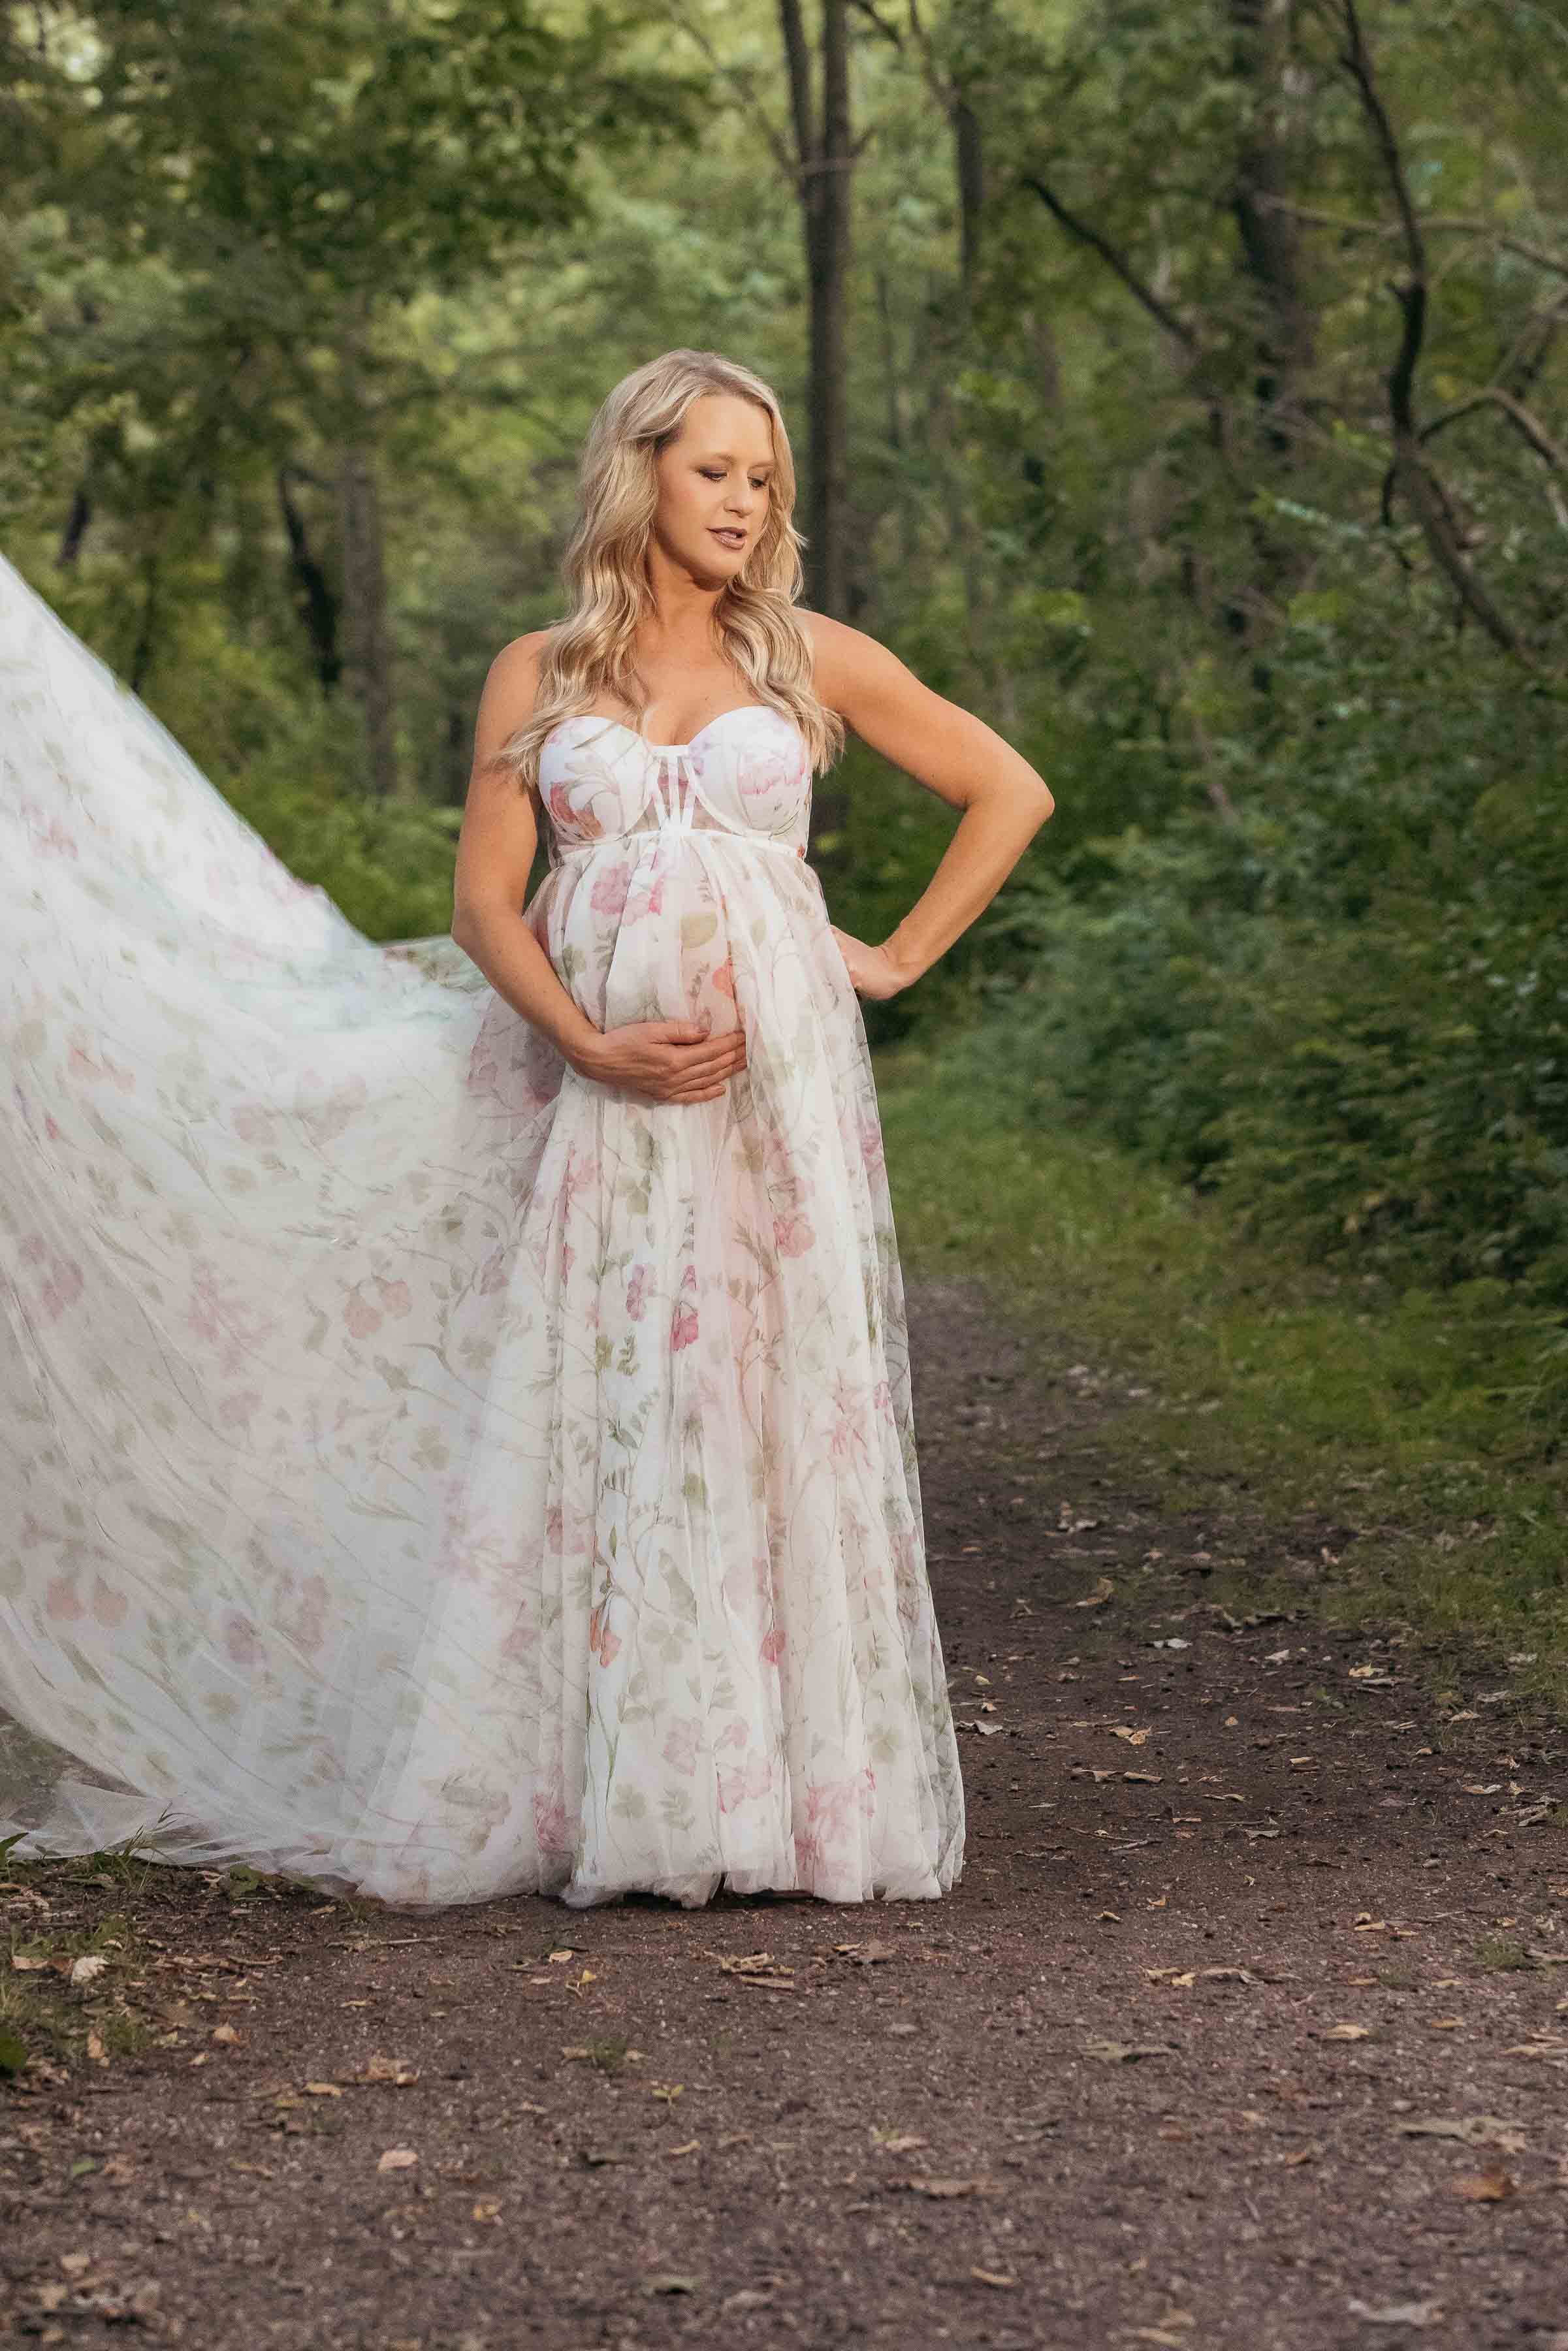 Outdoor Maternity Photos in Janesville WI